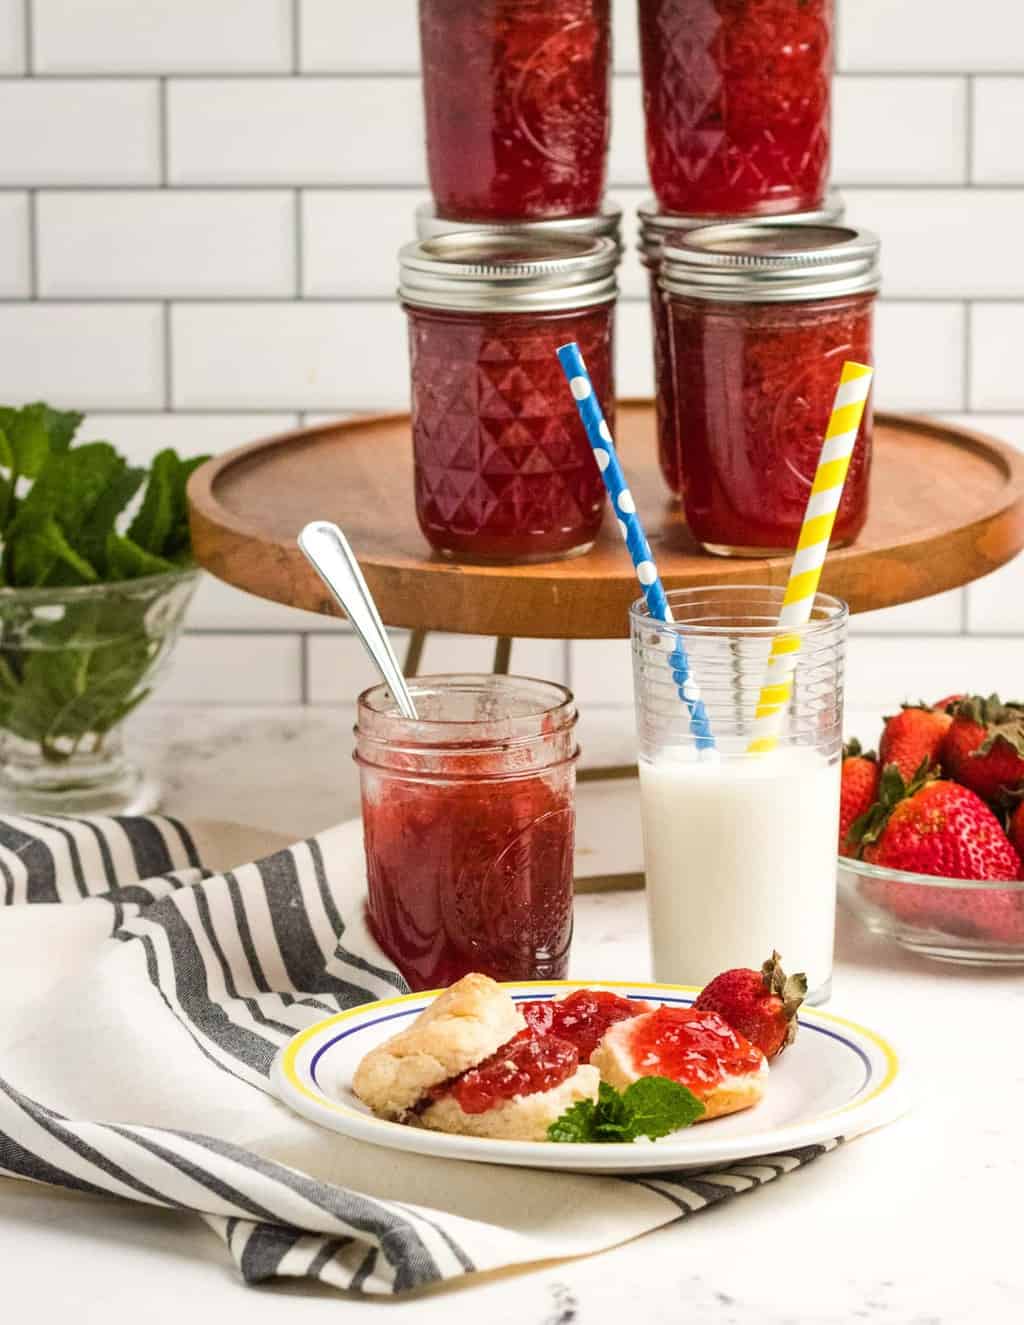 This Strawberry Mint Jam recipe is the best way to use fresh summer strawberries. Learn how to make the best strawberry refrigerator jam.